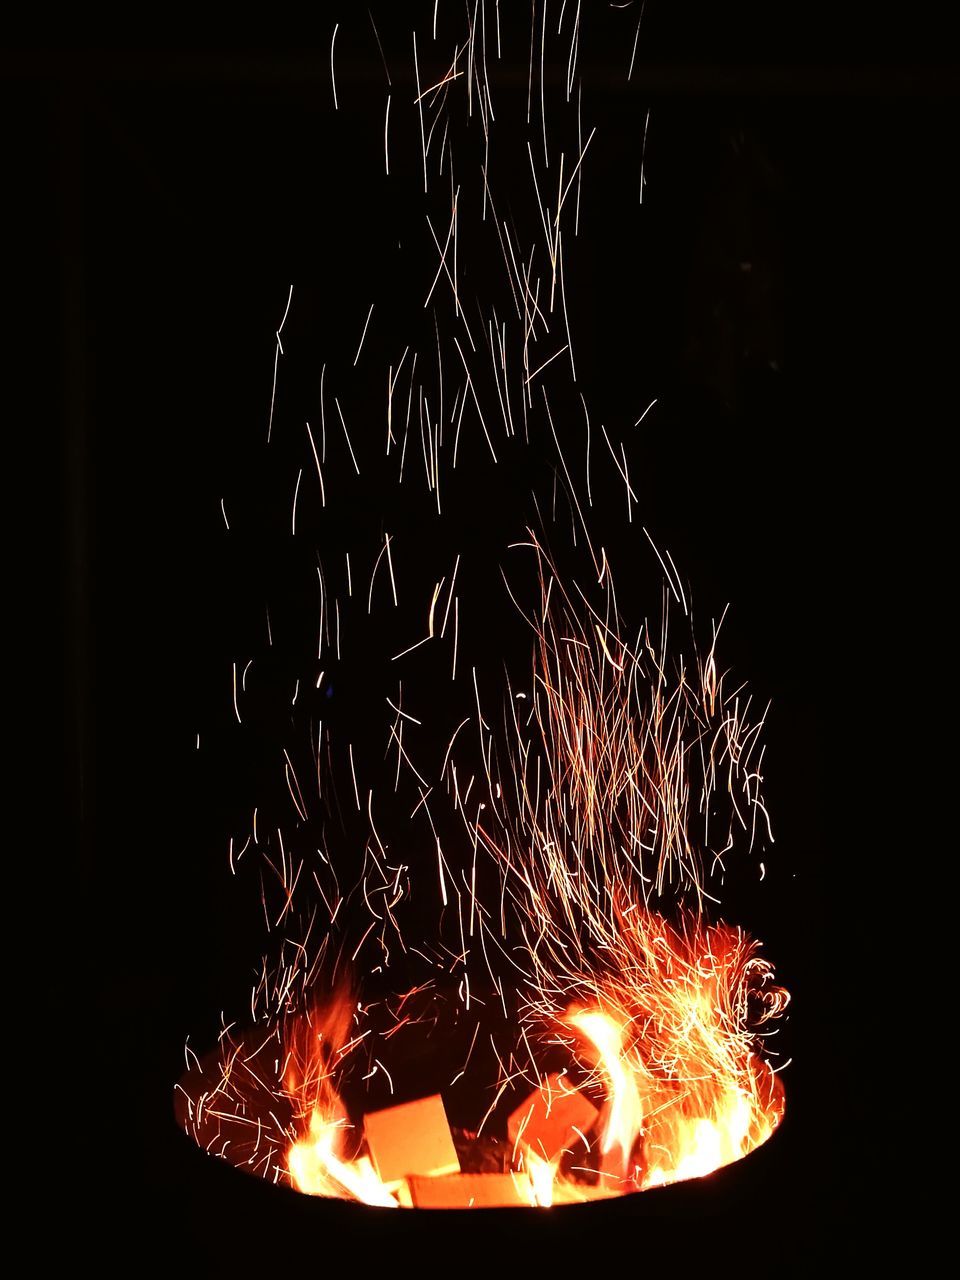 night, illuminated, long exposure, fire - natural phenomenon, glowing, firework display, celebration, motion, firework - man made object, sparks, exploding, burning, arts culture and entertainment, event, blurred motion, flame, firework, heat - temperature, low angle view, dark